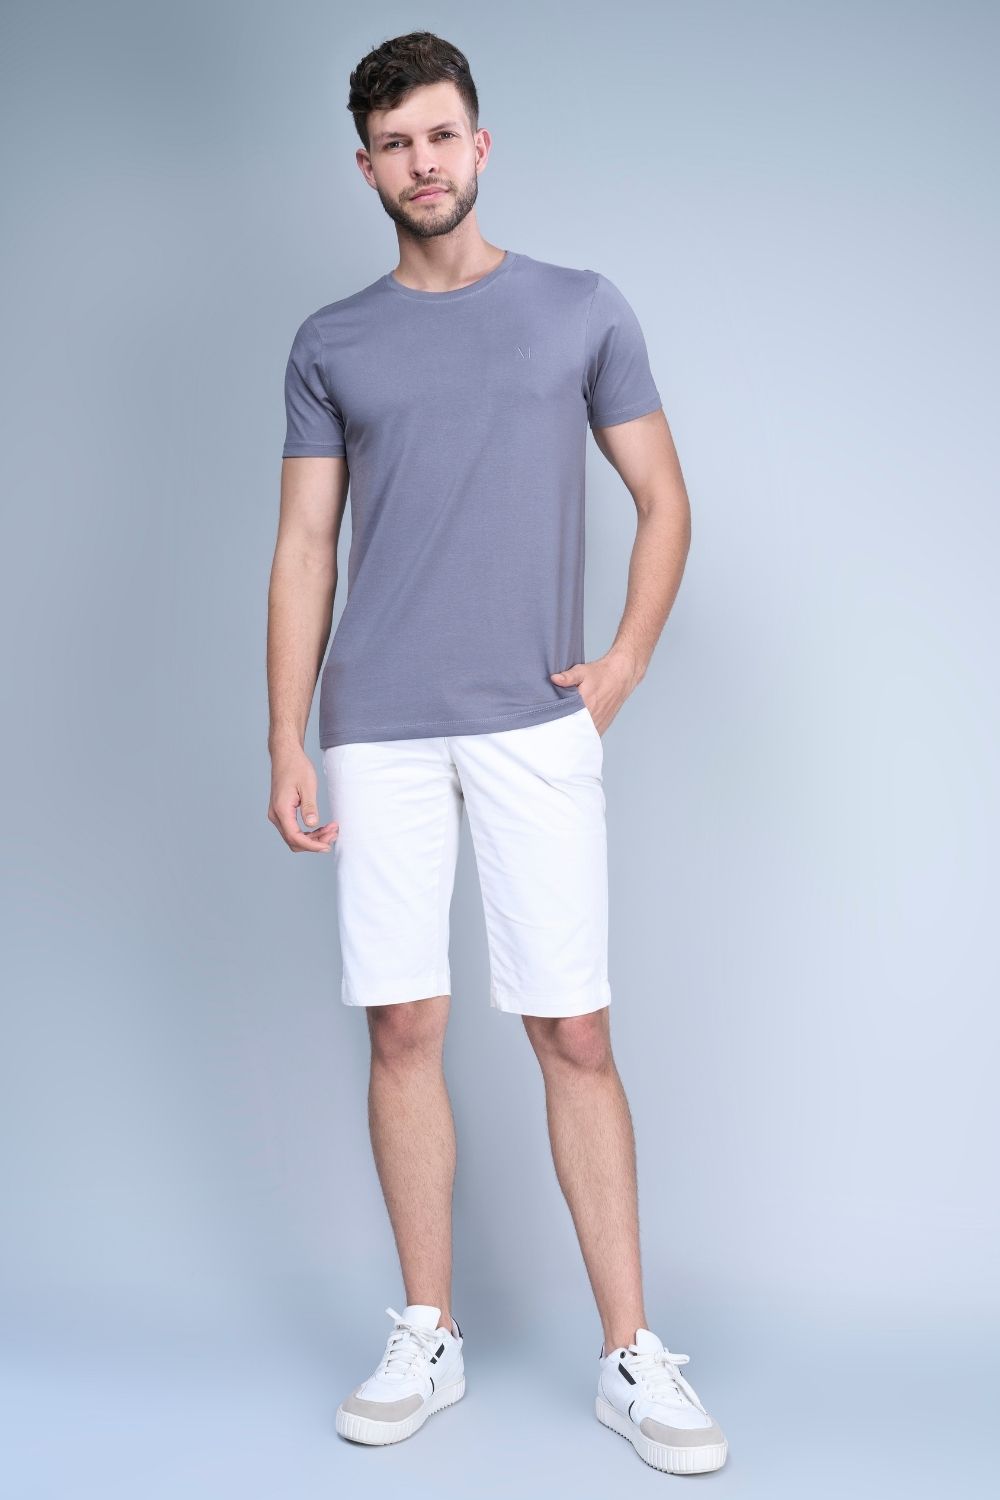 Vista Blue colored, solid t shirt for men with round neck and half sleeves, full view.